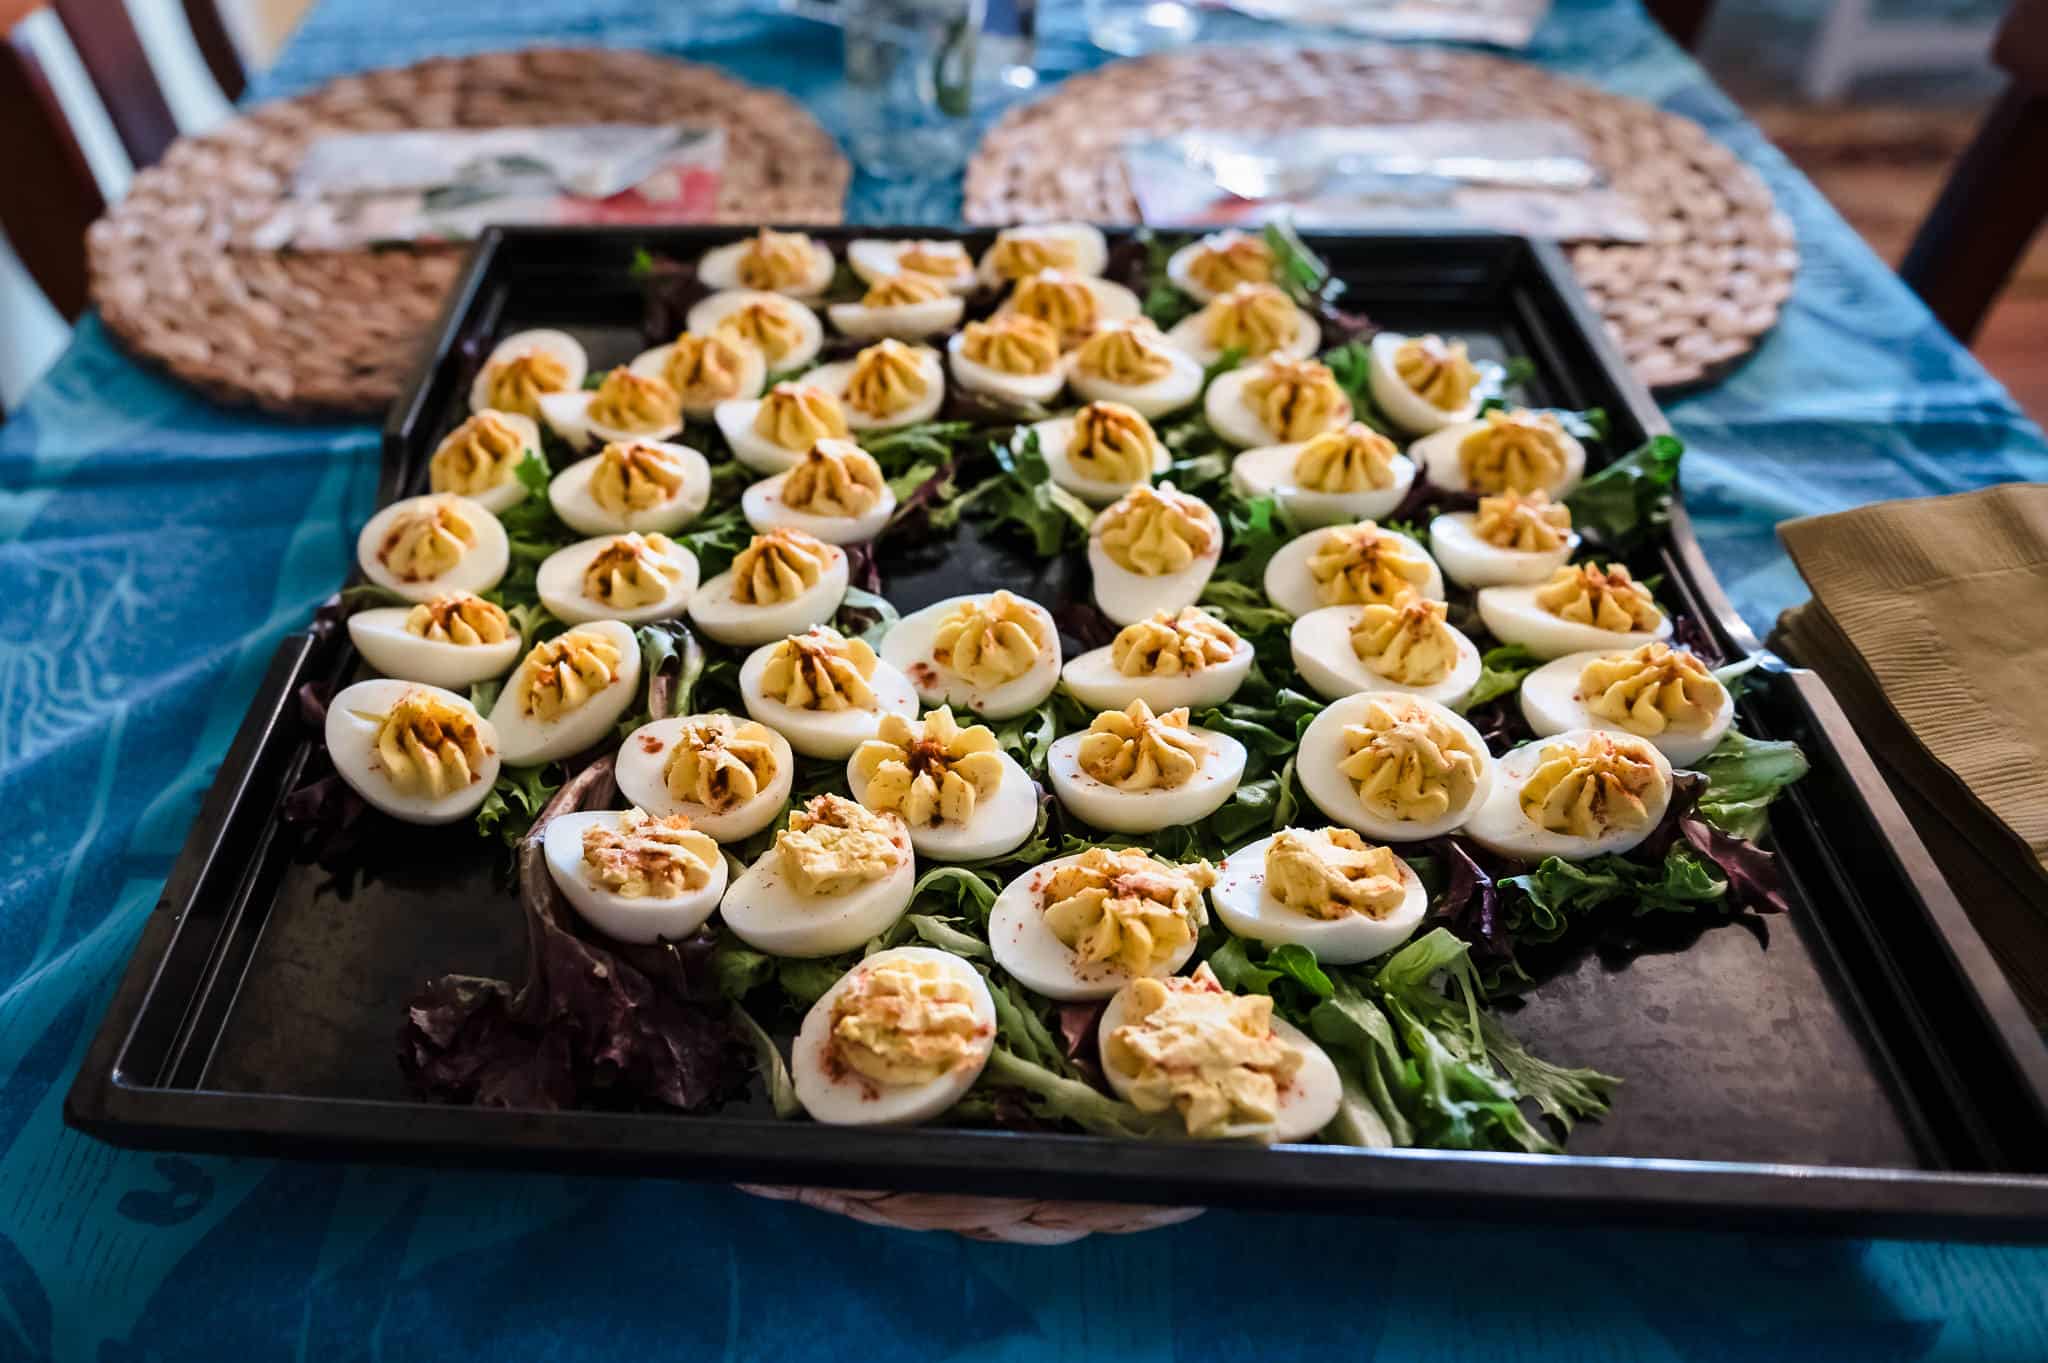 A platter filled with deviled eggs for guests at a birthday party.